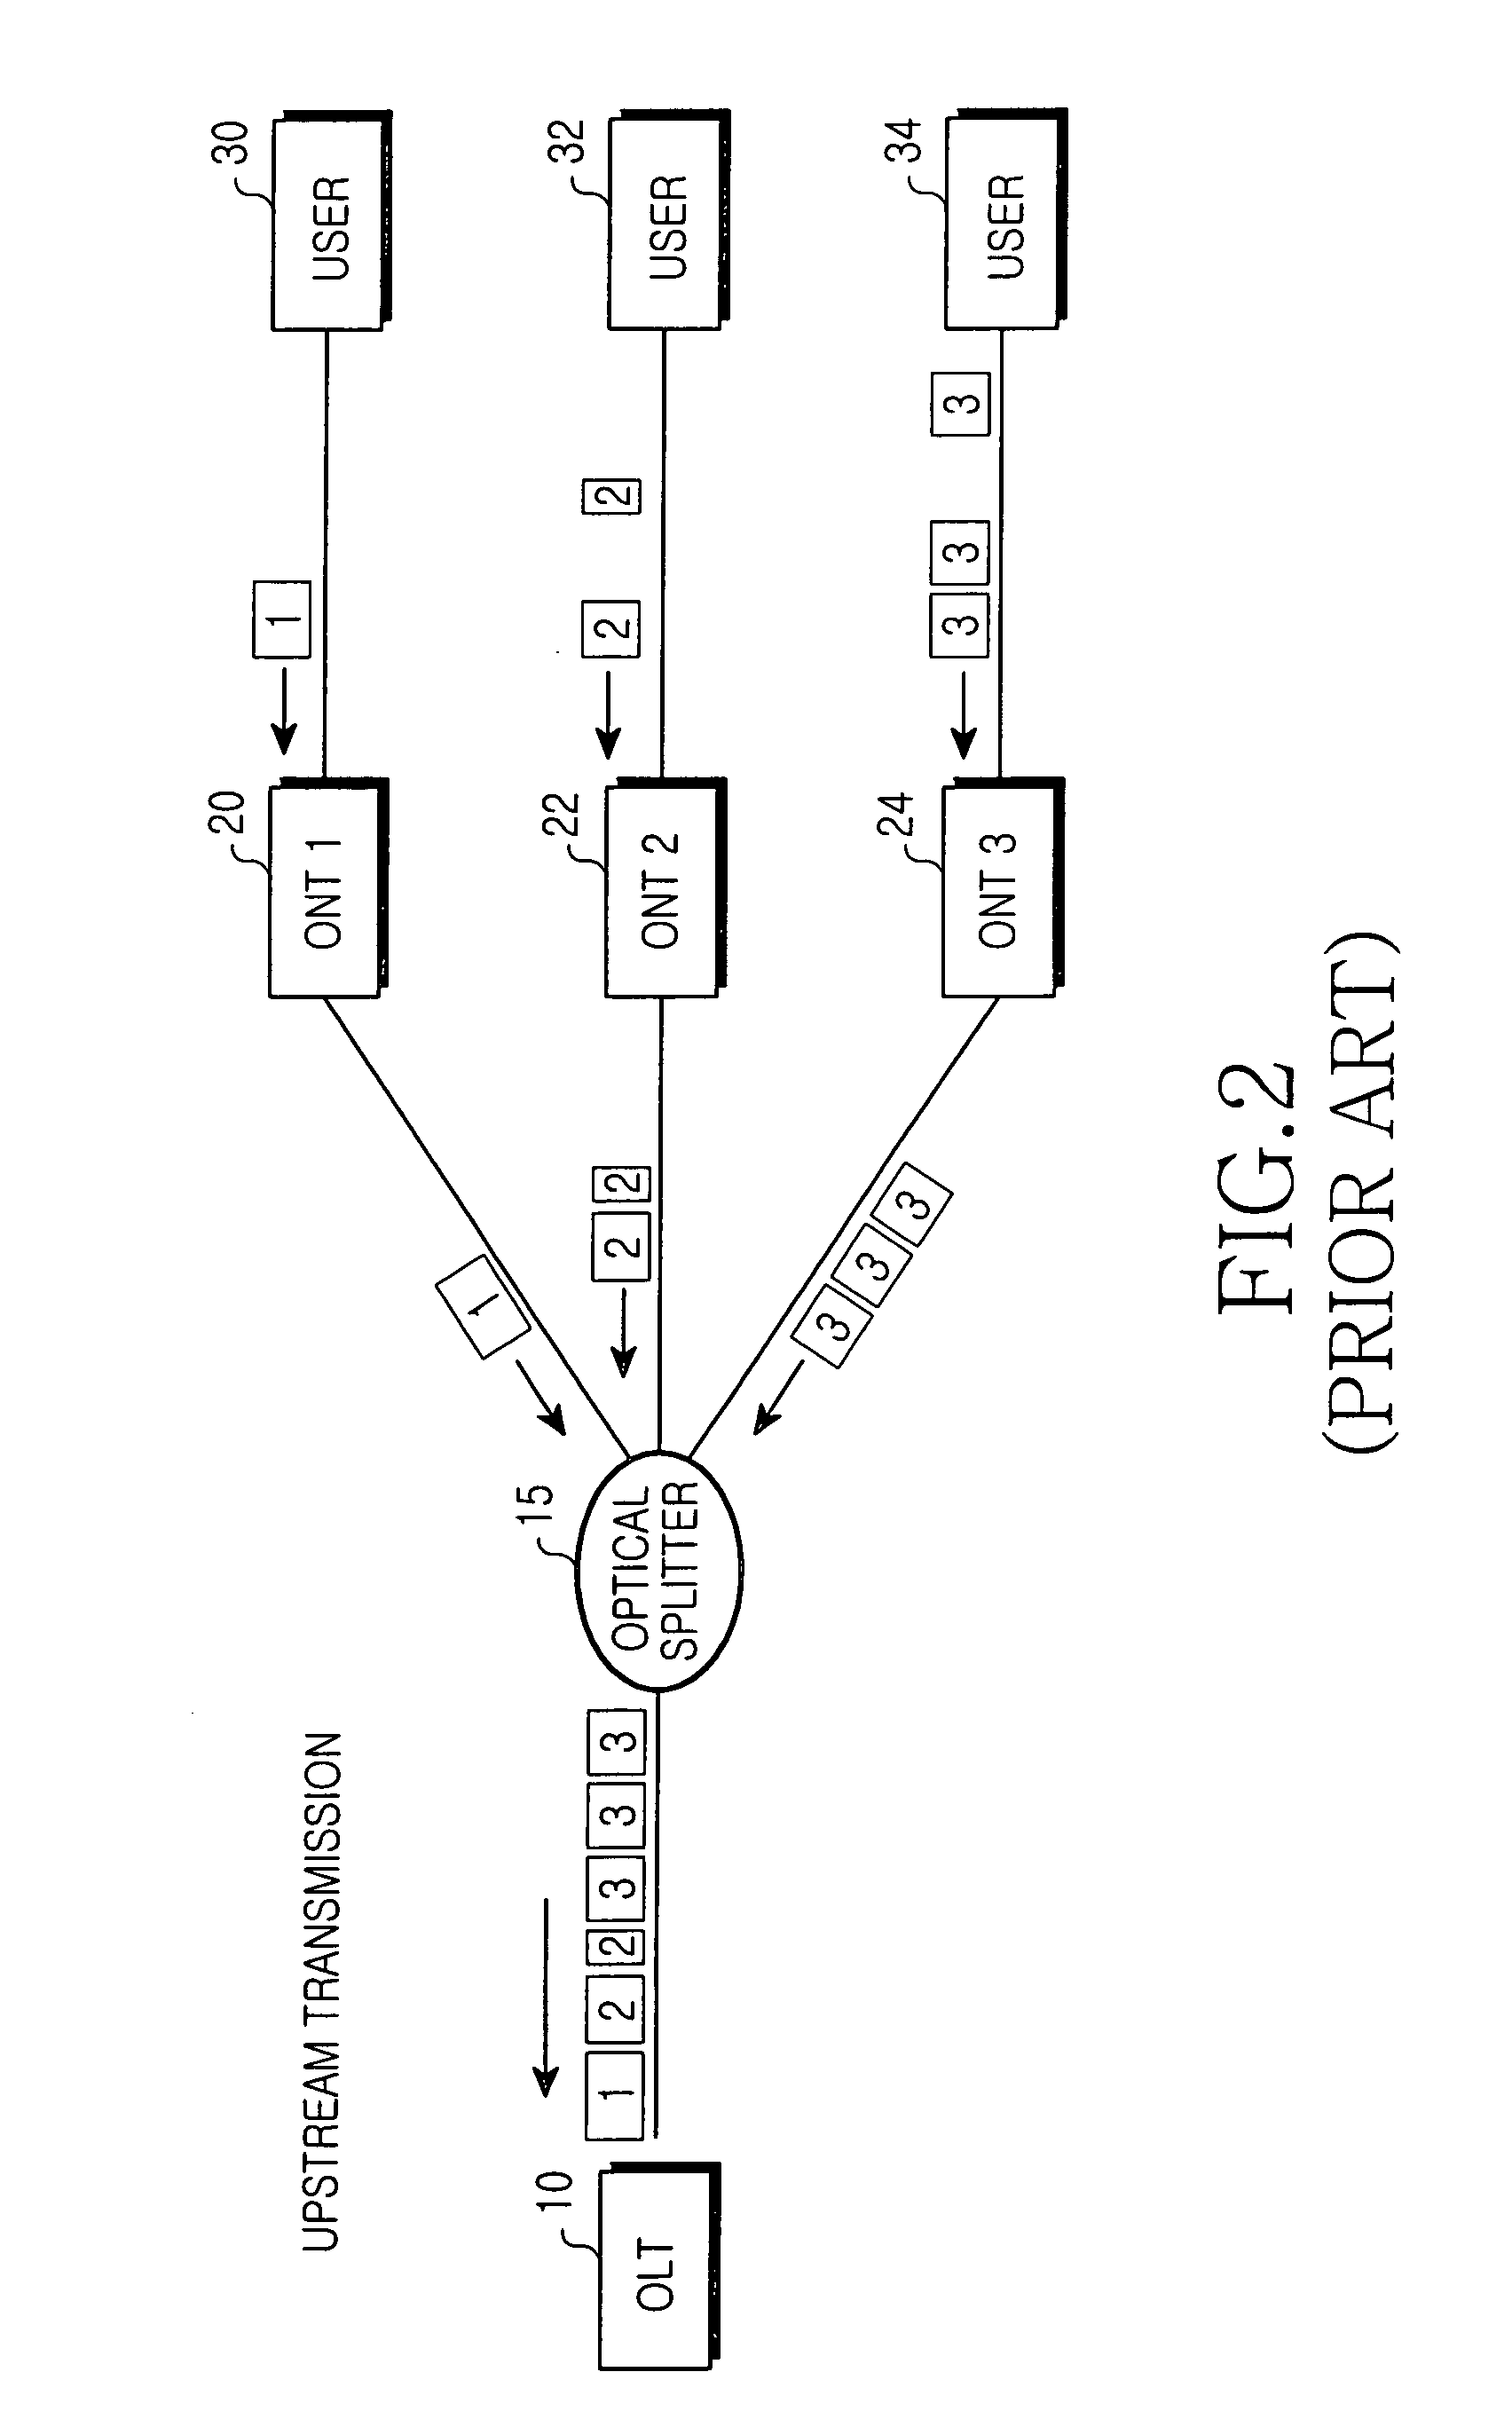 Gigabit ethernet passive optical network and method for accurately detecting data errors